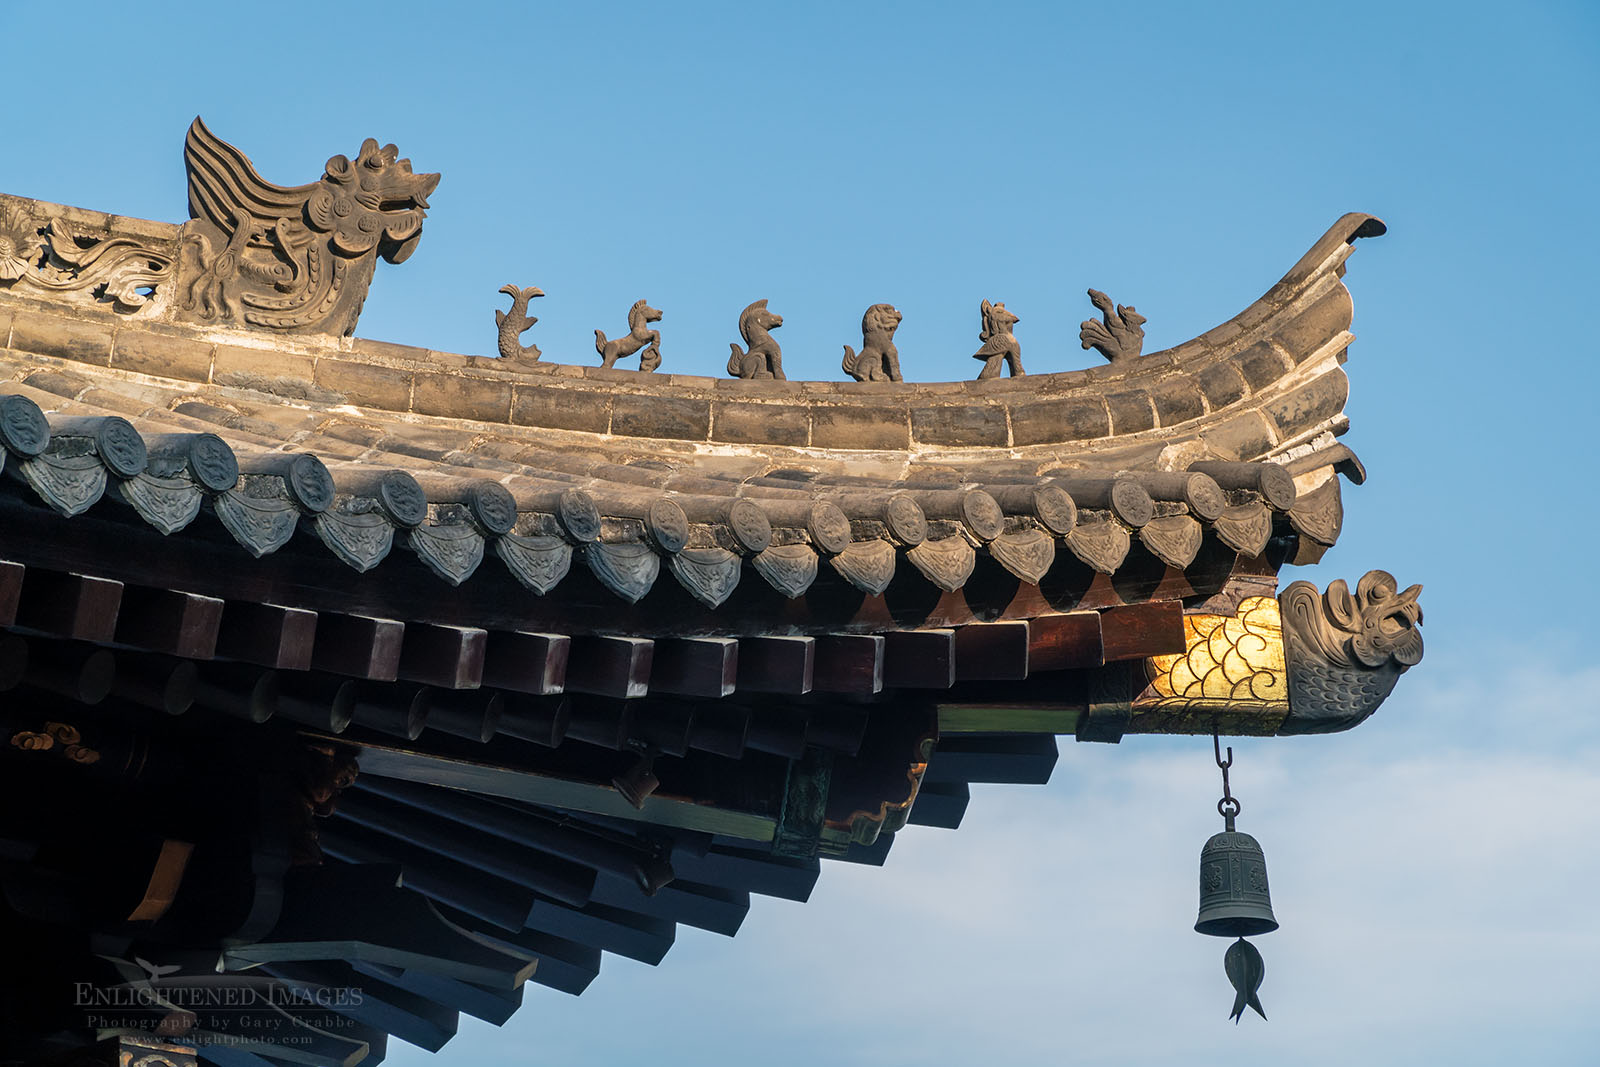 Photo: Imperial Roof Charm Decorations on the Daci'en Temple at the Giant Wild Goose Pagoda, a UNESCO World Heritage Site, Xi'an, China